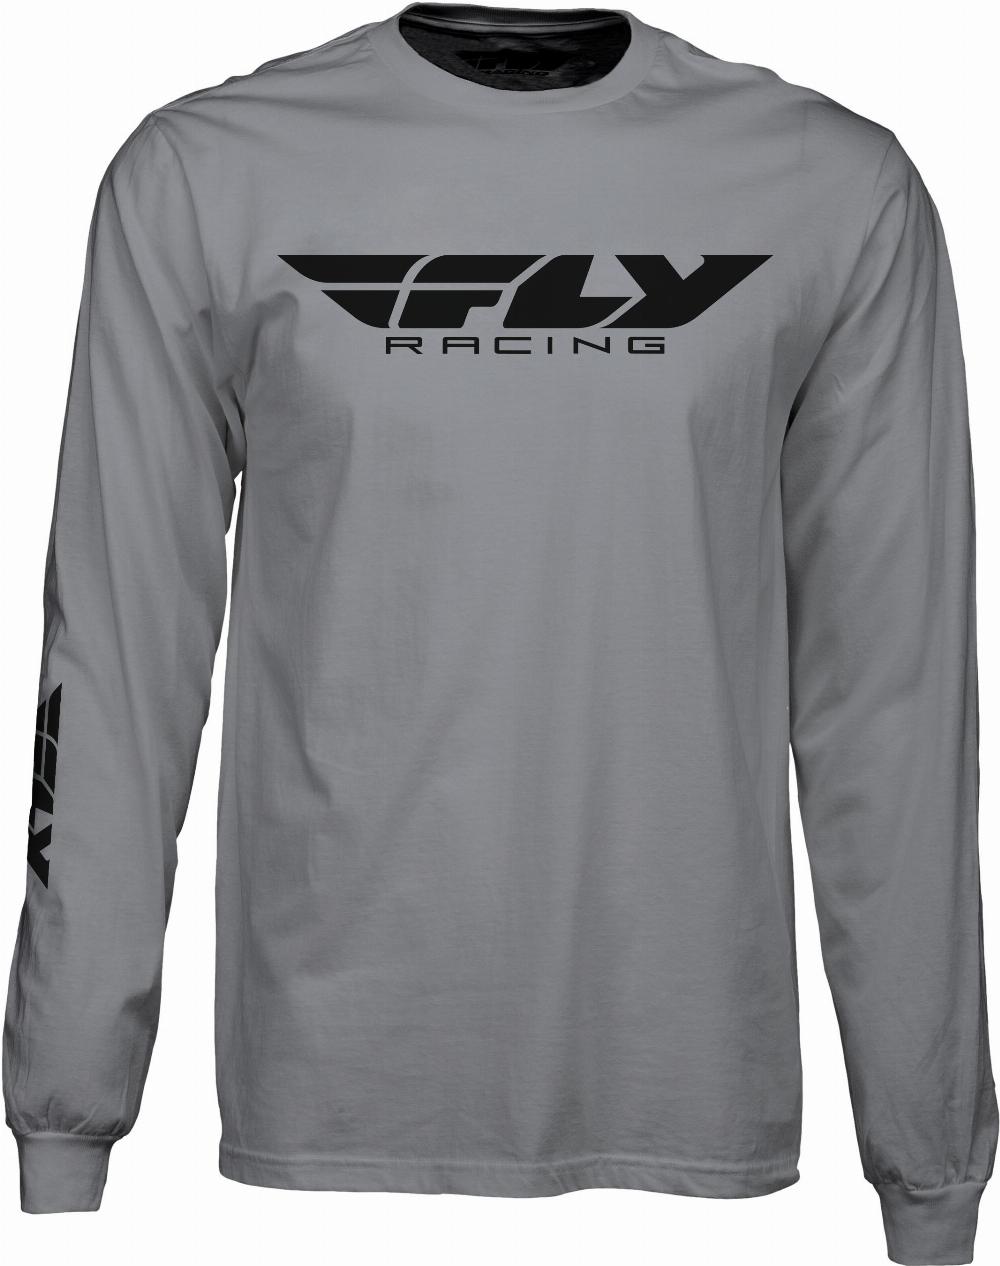 FLY CORPORATE L/S TEE GREY MD#mpn_352-4146M